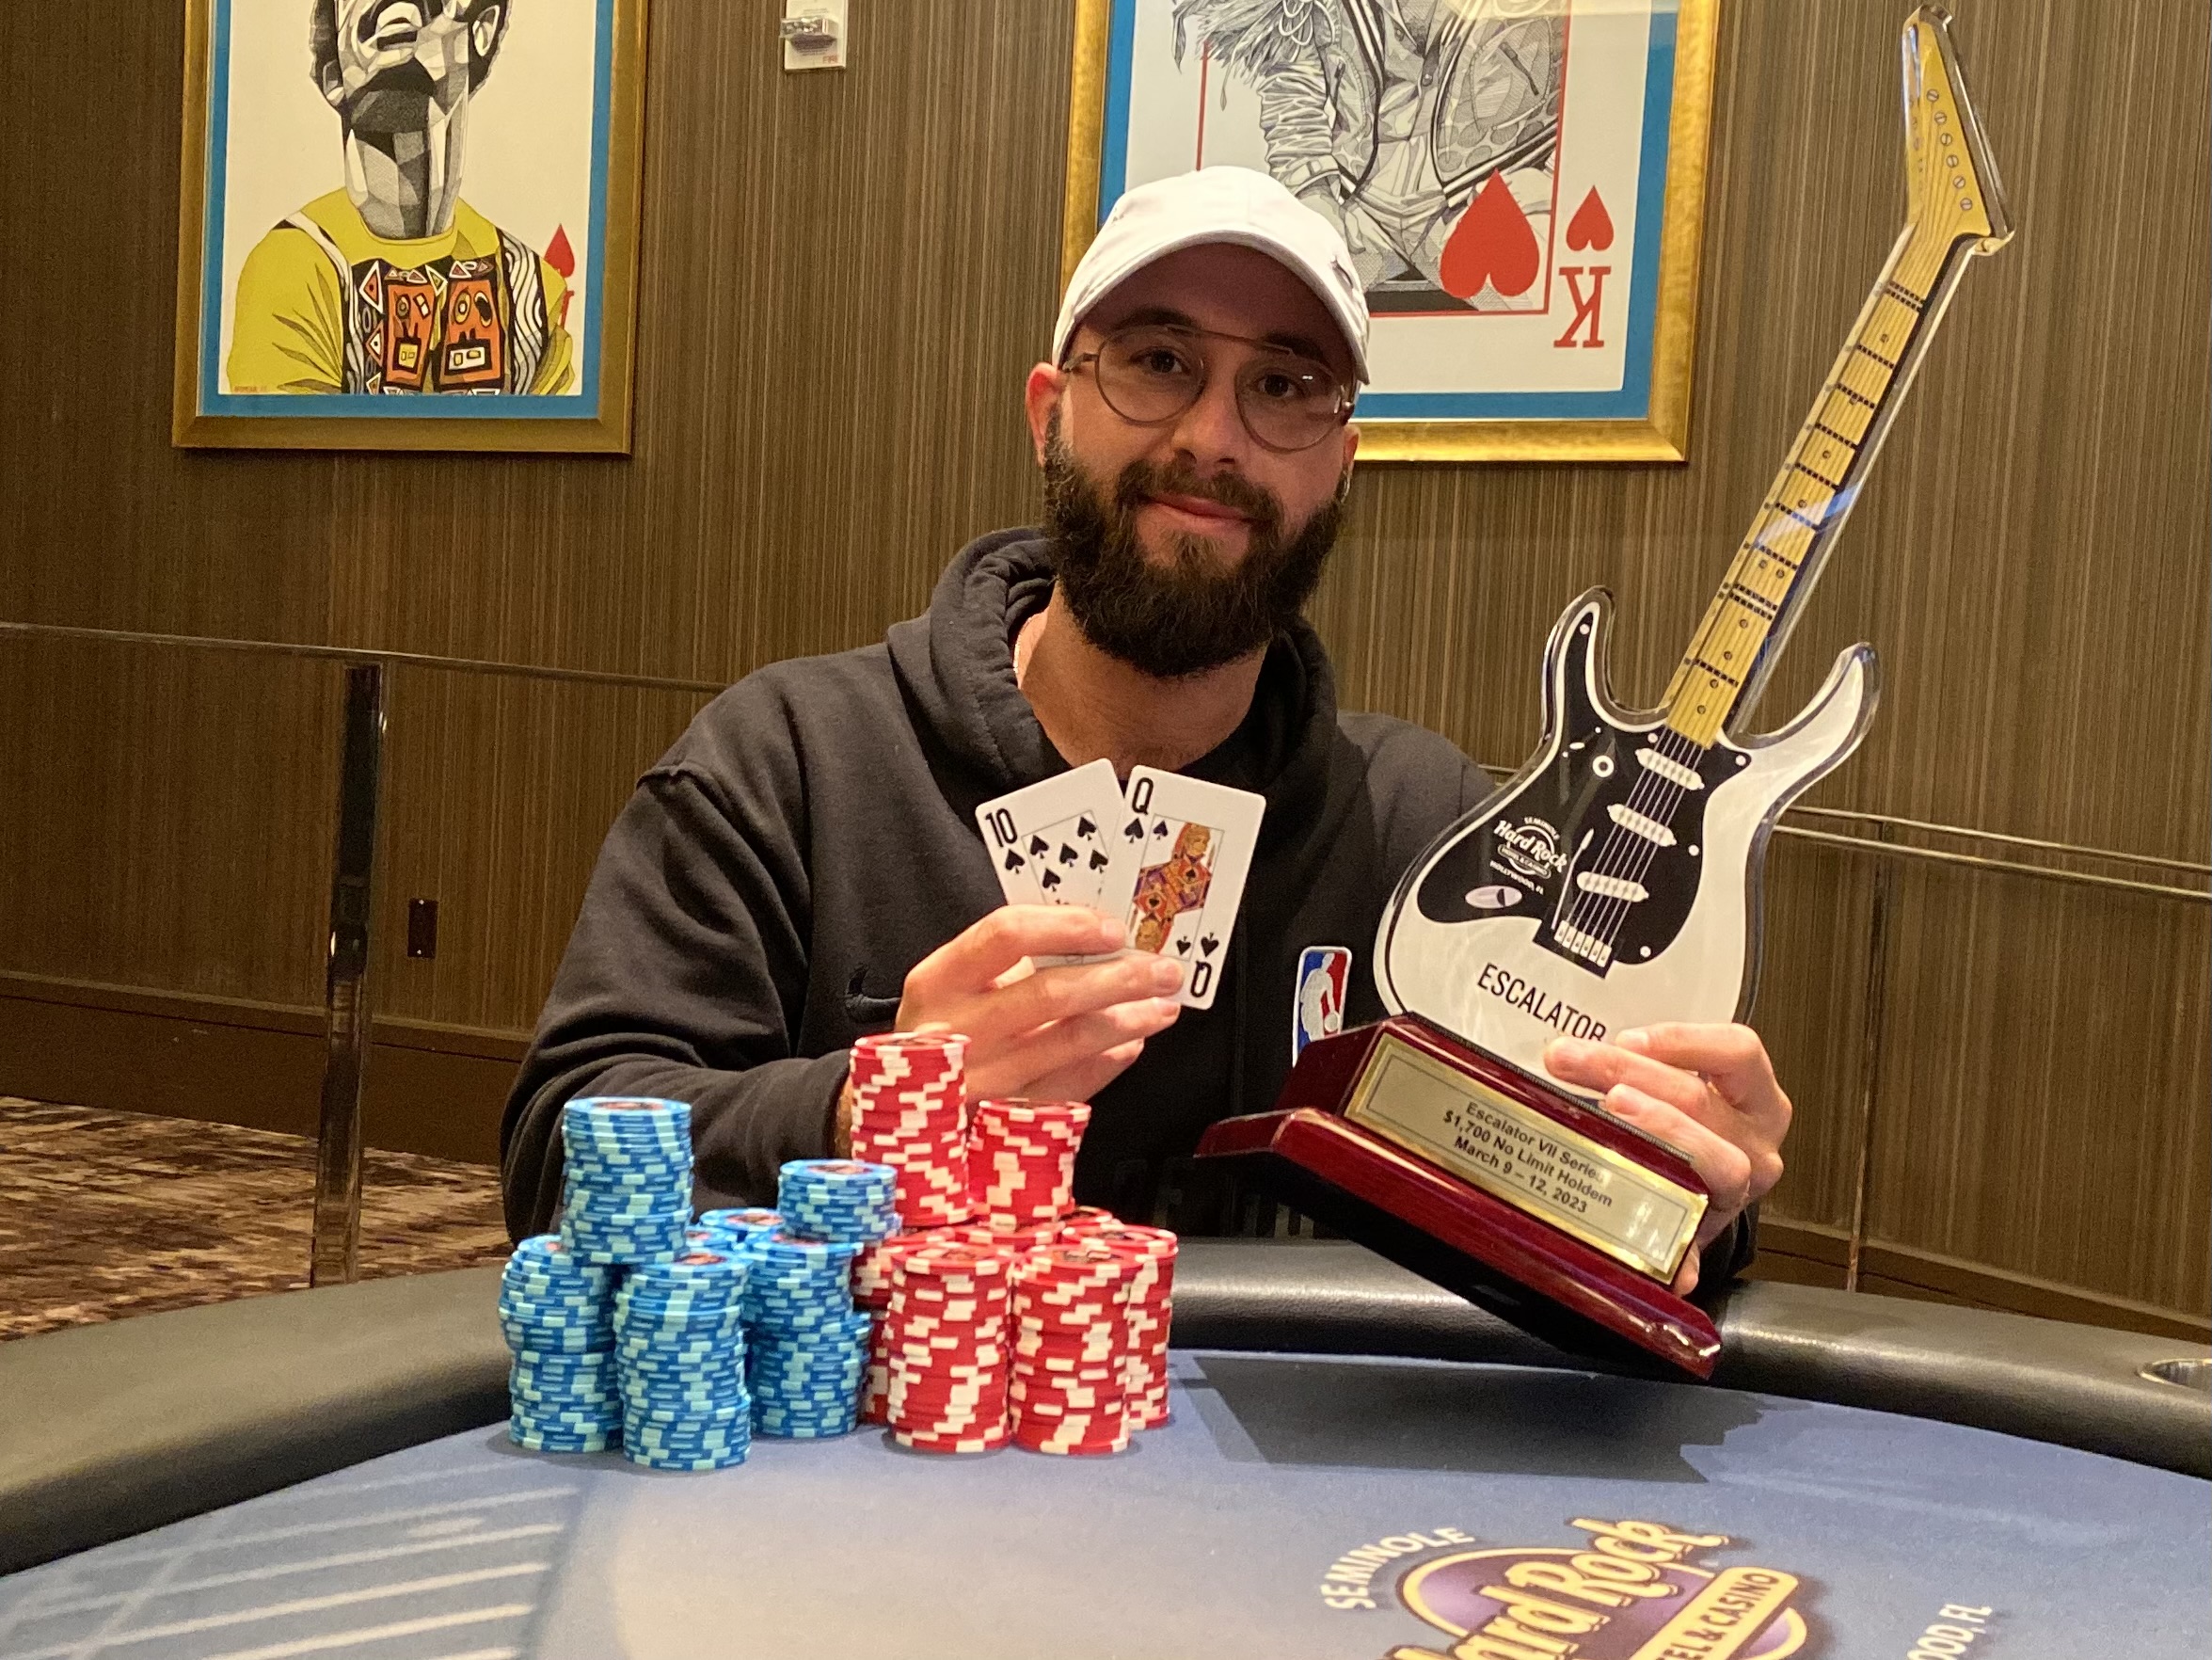 Aaron Stefansky Wins Event 5 of the Escalator VII Series In Heads-Up Deal for $135,733